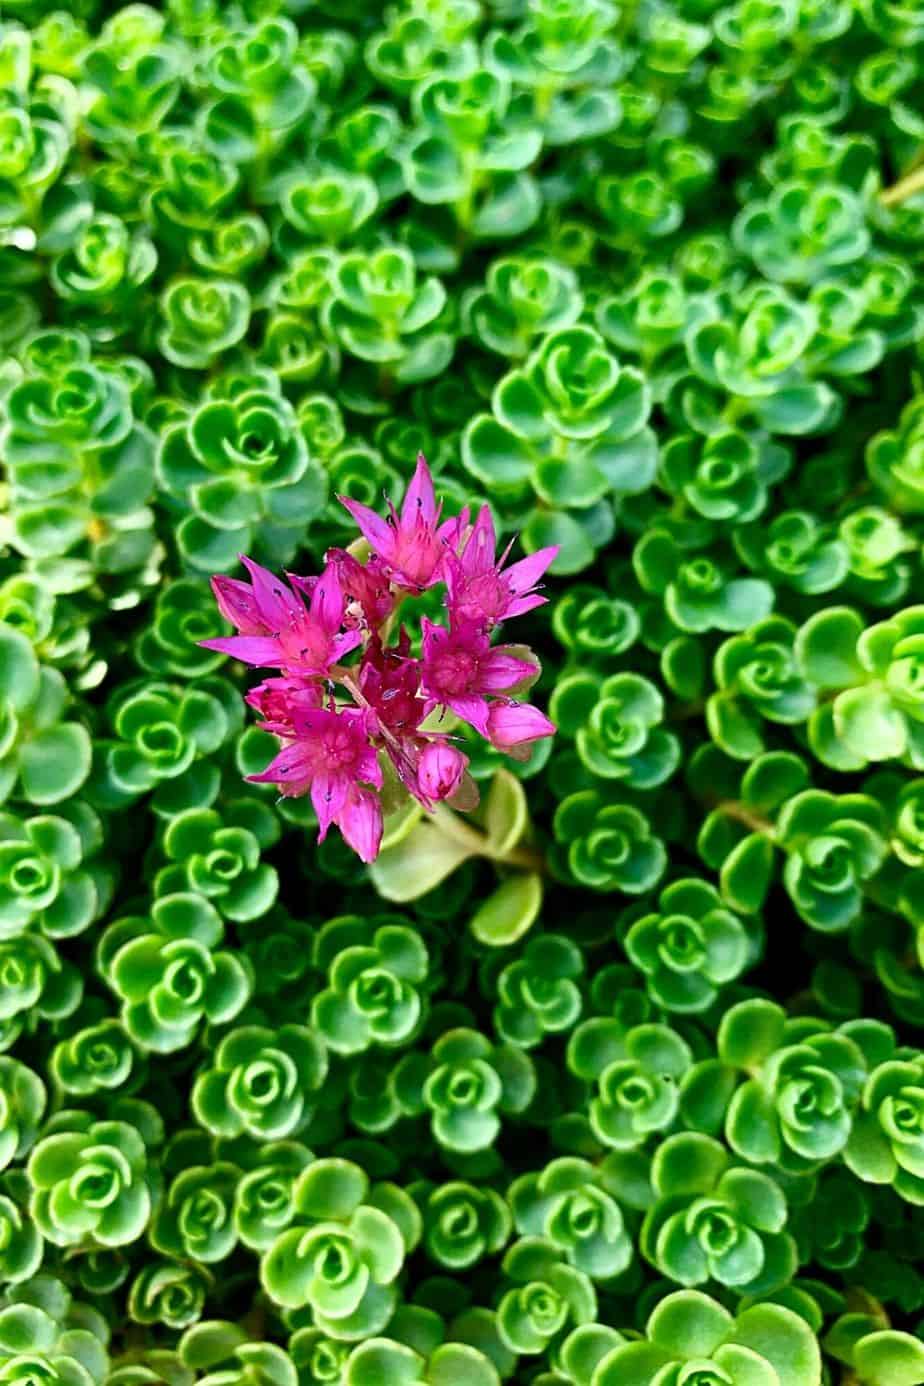 You can easily grow Sedum in your south-facing balcony if you have the right type of seeds